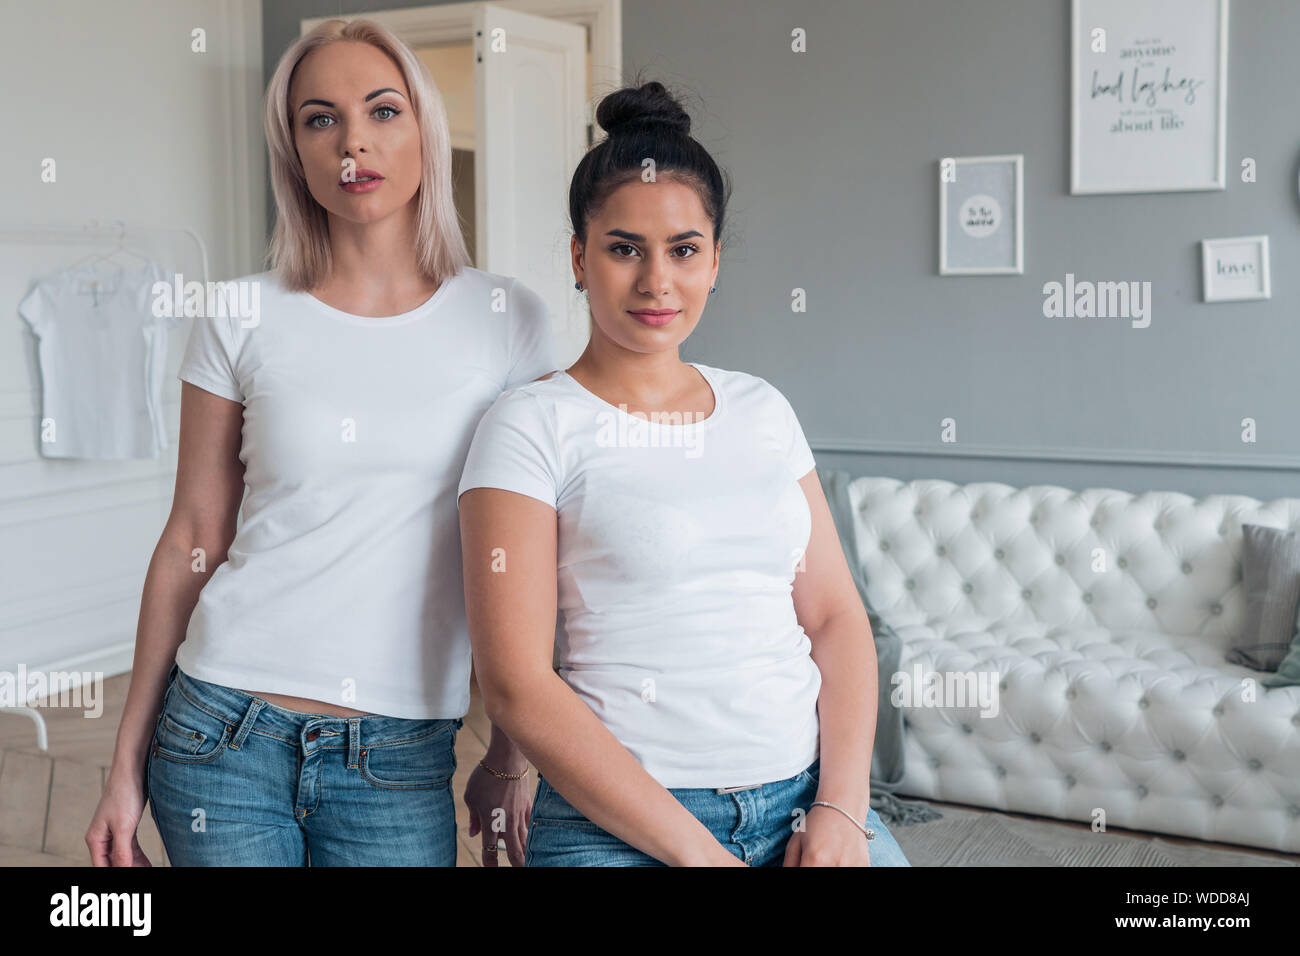 Portrait of two girlfriends blonde and brunette in white t-shirts without design Stock Photo